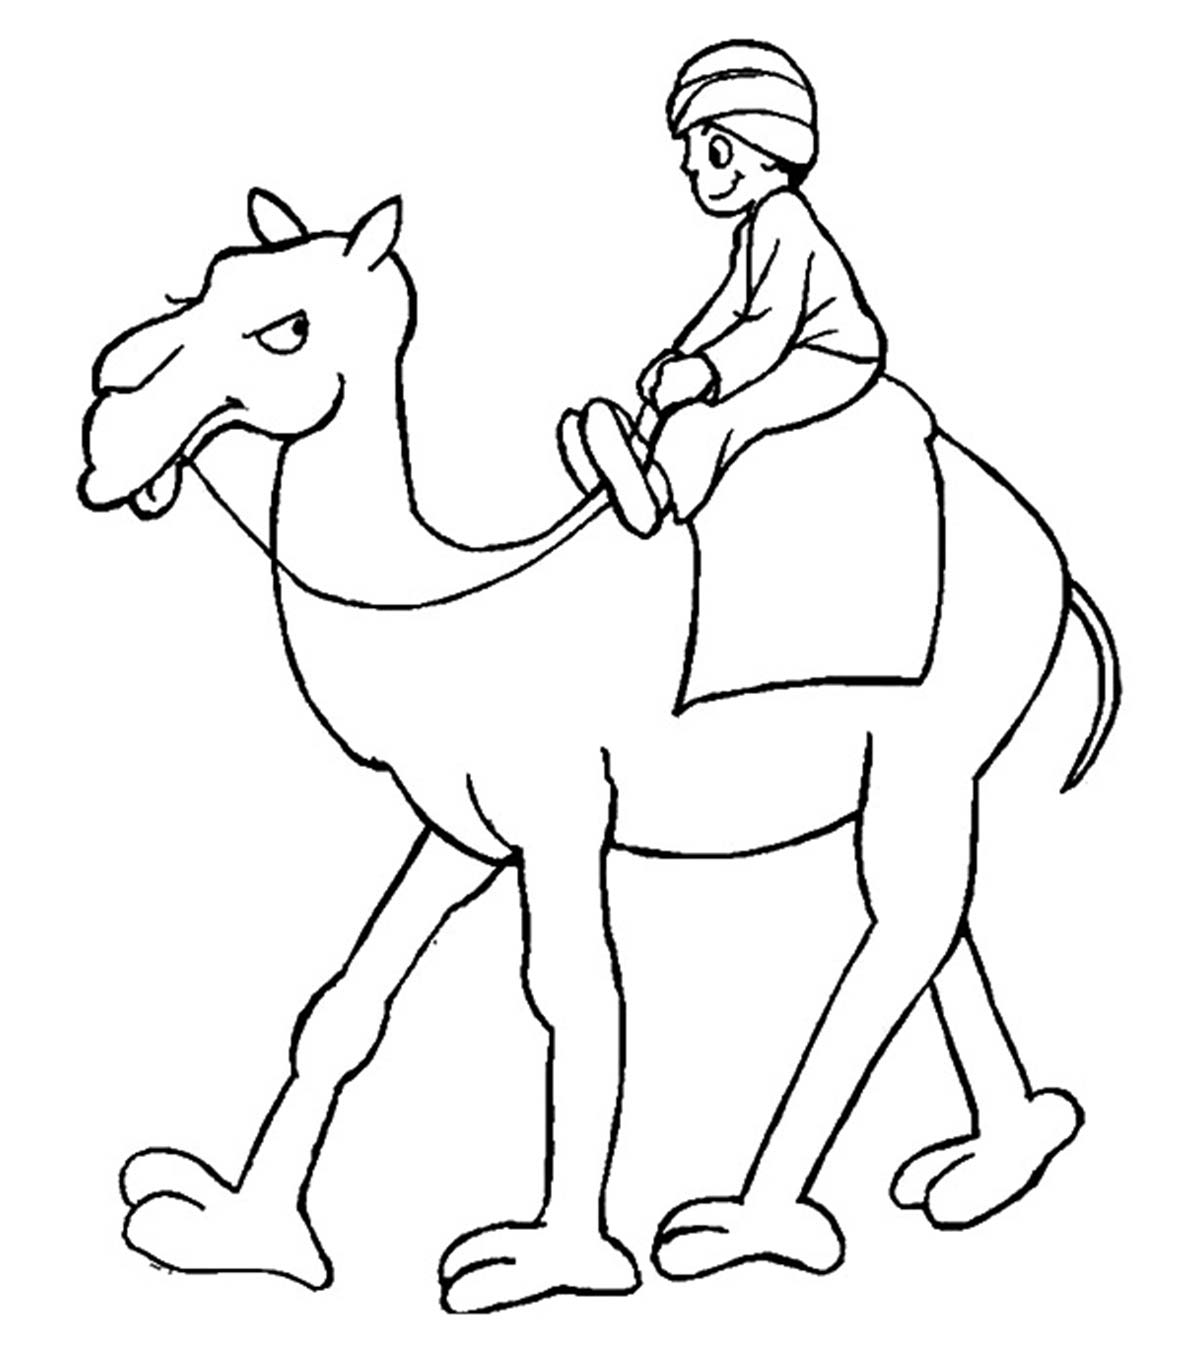 Download thesebemypics: Cute Camel Coloring Page